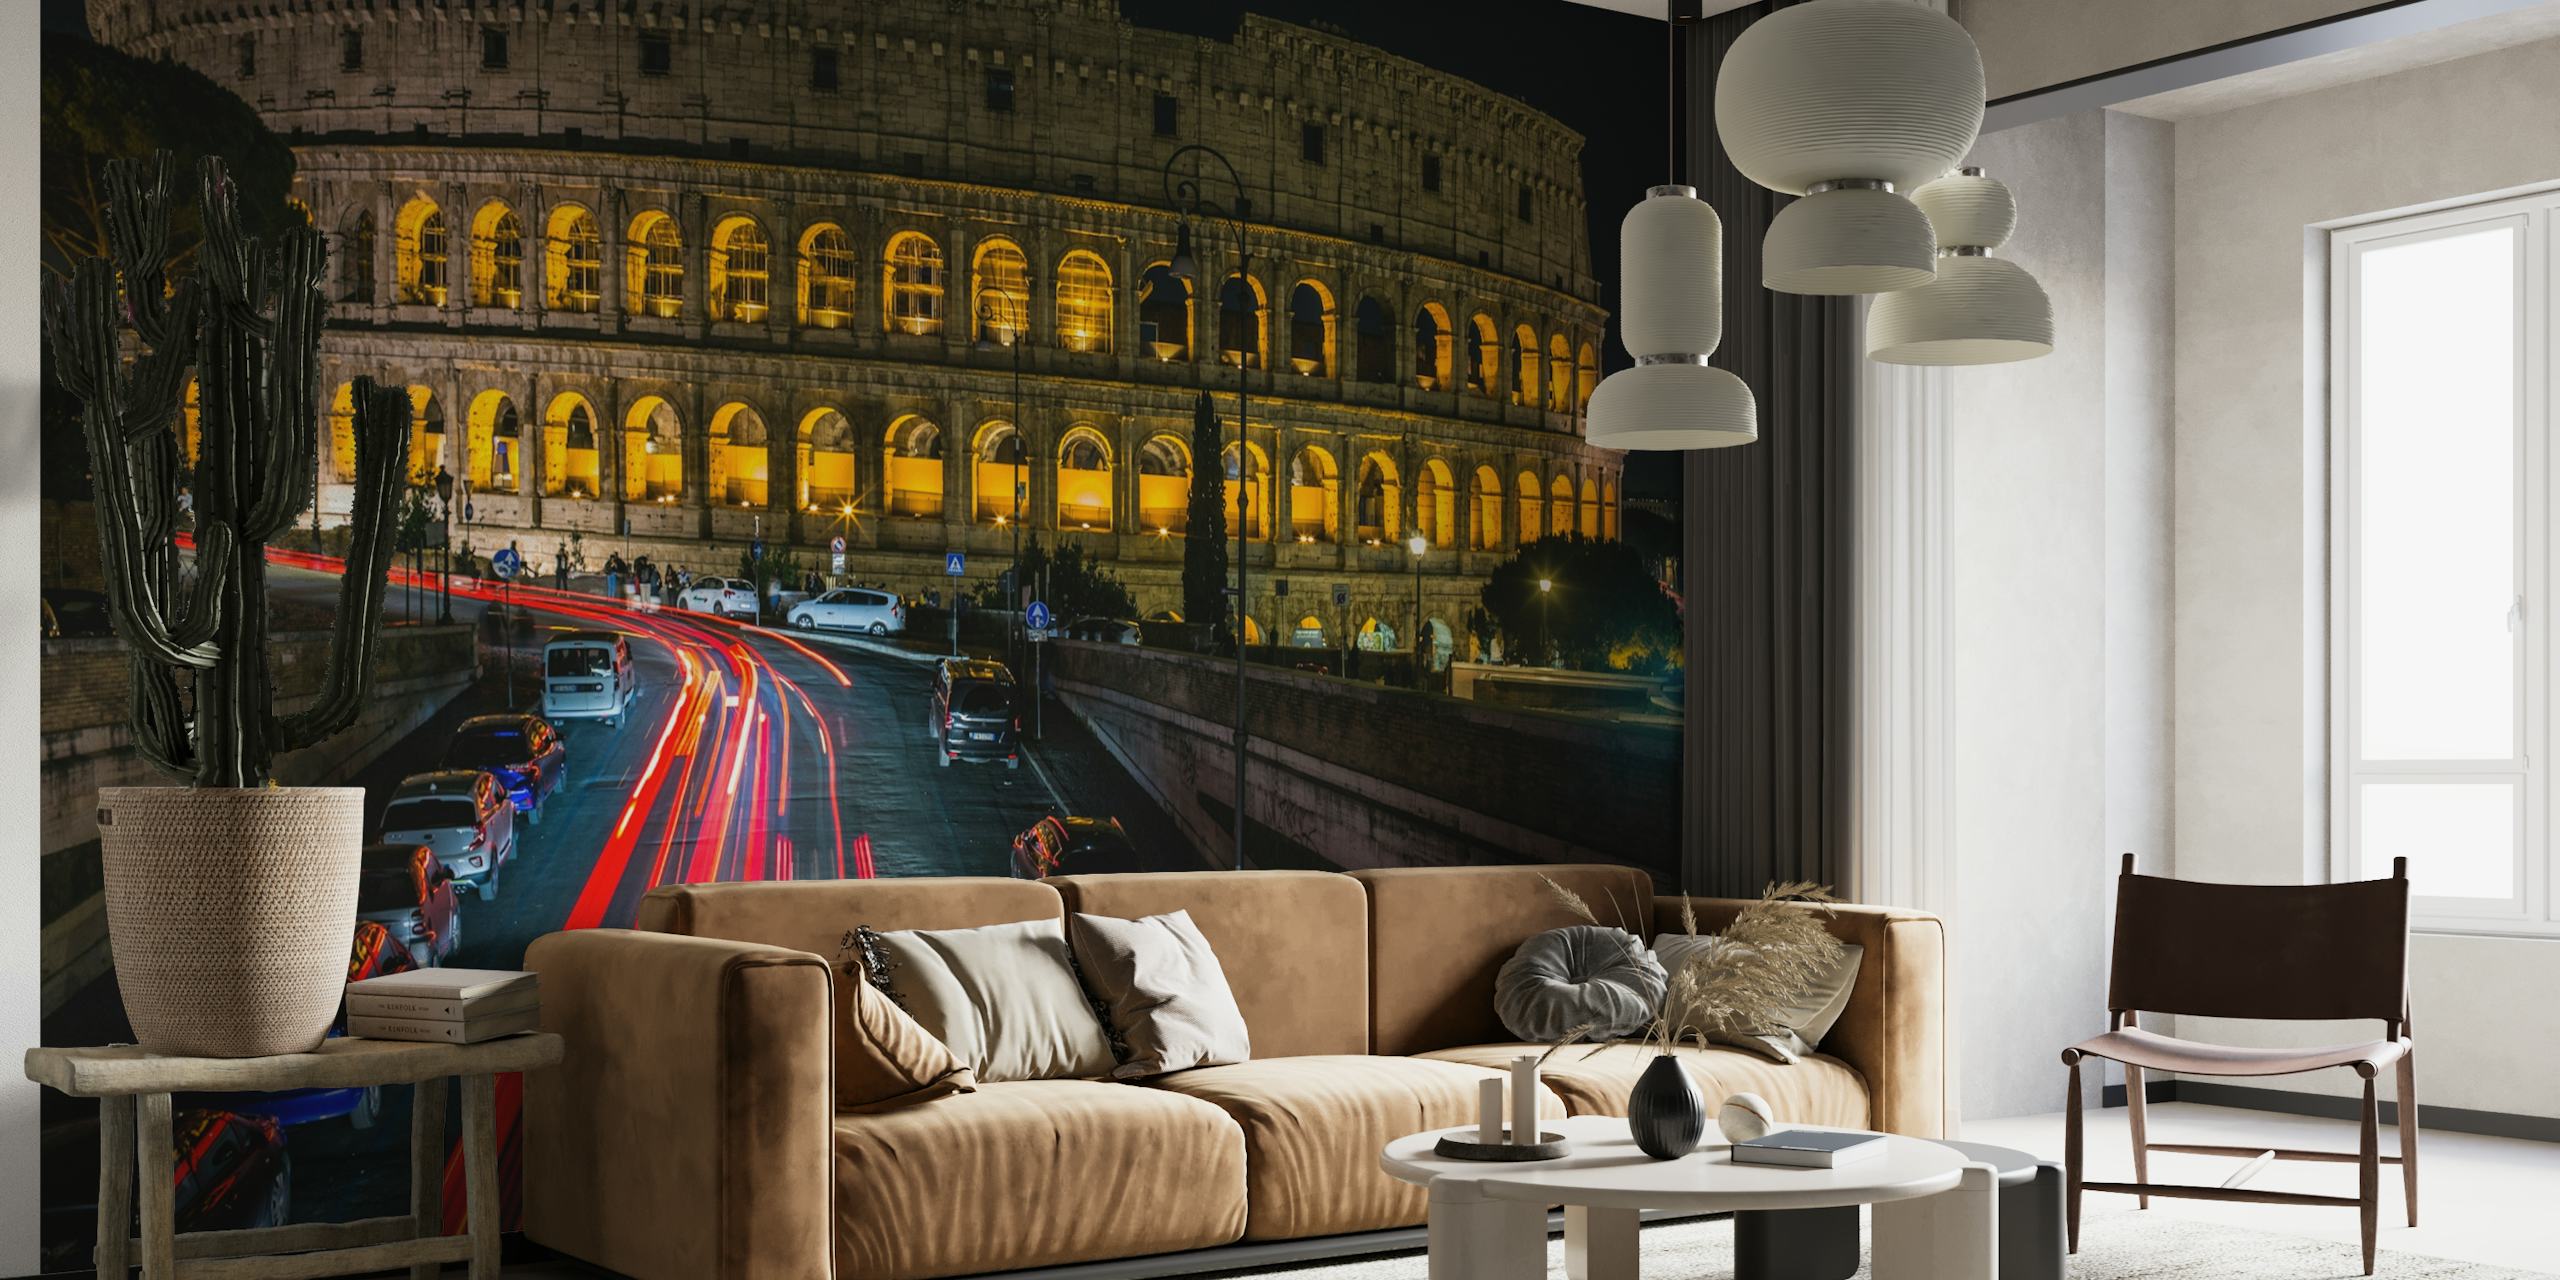 Colosseum at night wall mural with illuminated arches and traffic streaks